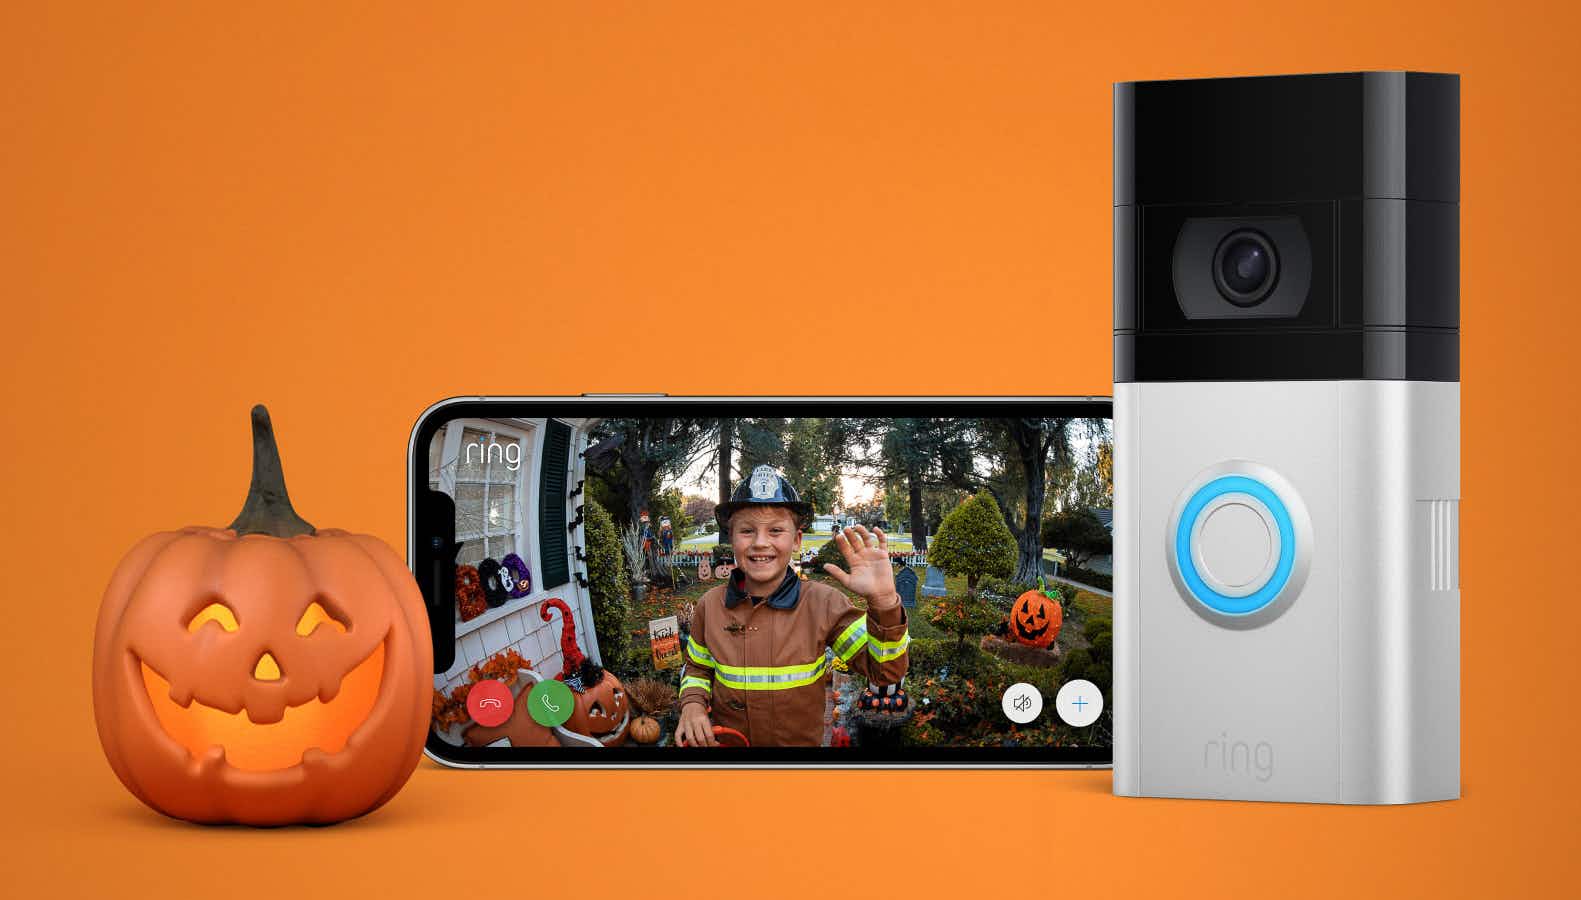 A Ring video doorbell camera next to a phone displaying a video feed and a pumpkin on an orange background